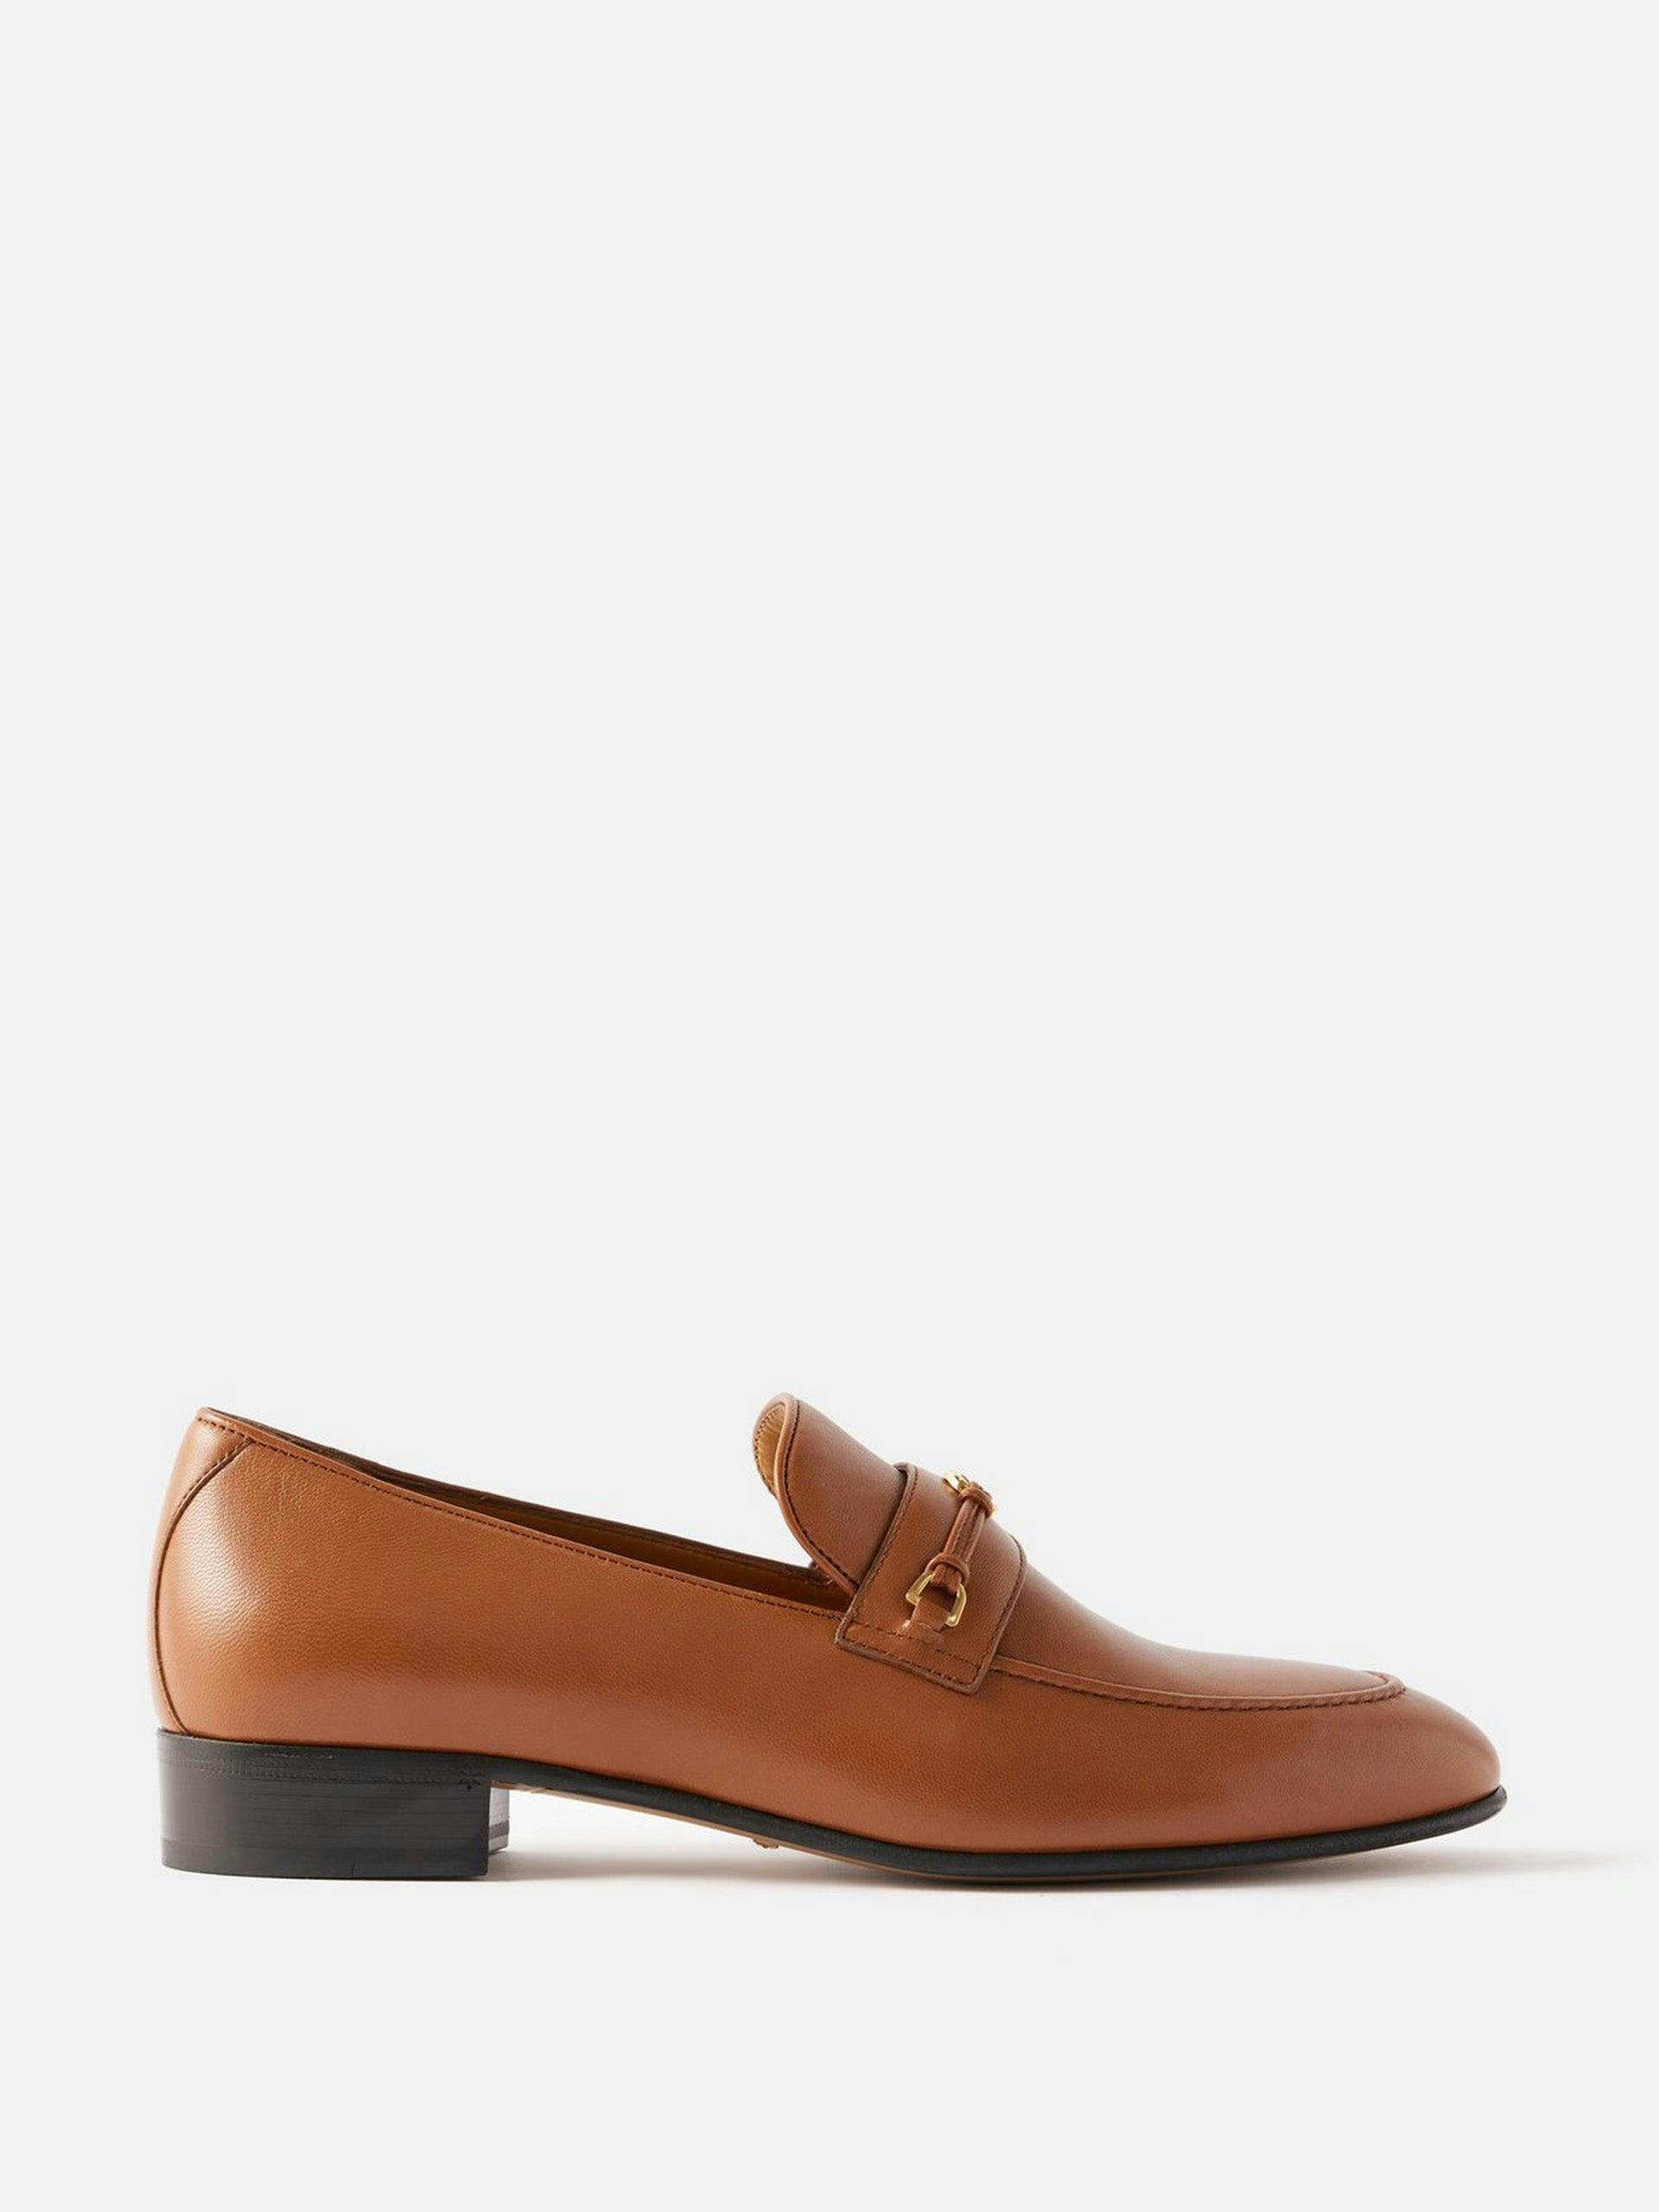 Ed buckle-strap leather loafers